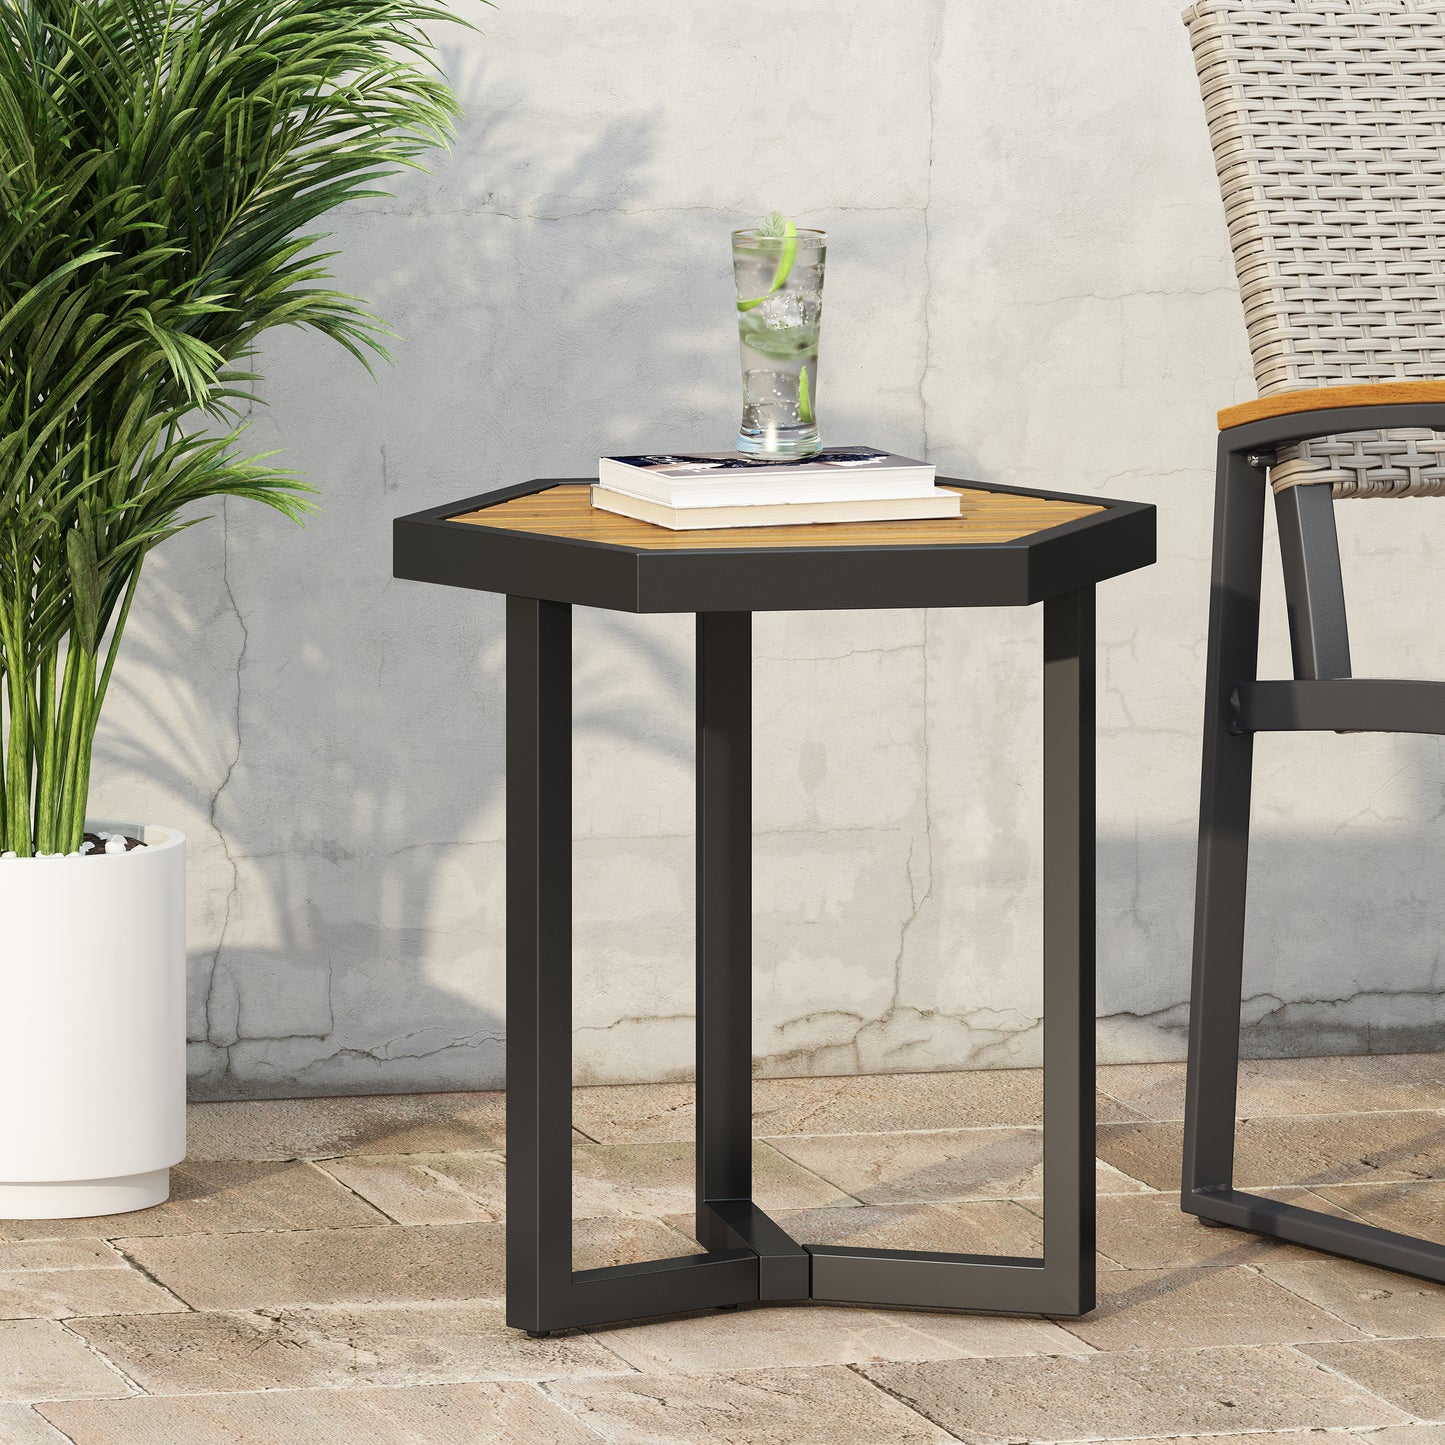 Taos Outdoor Acacia Wood Side Table